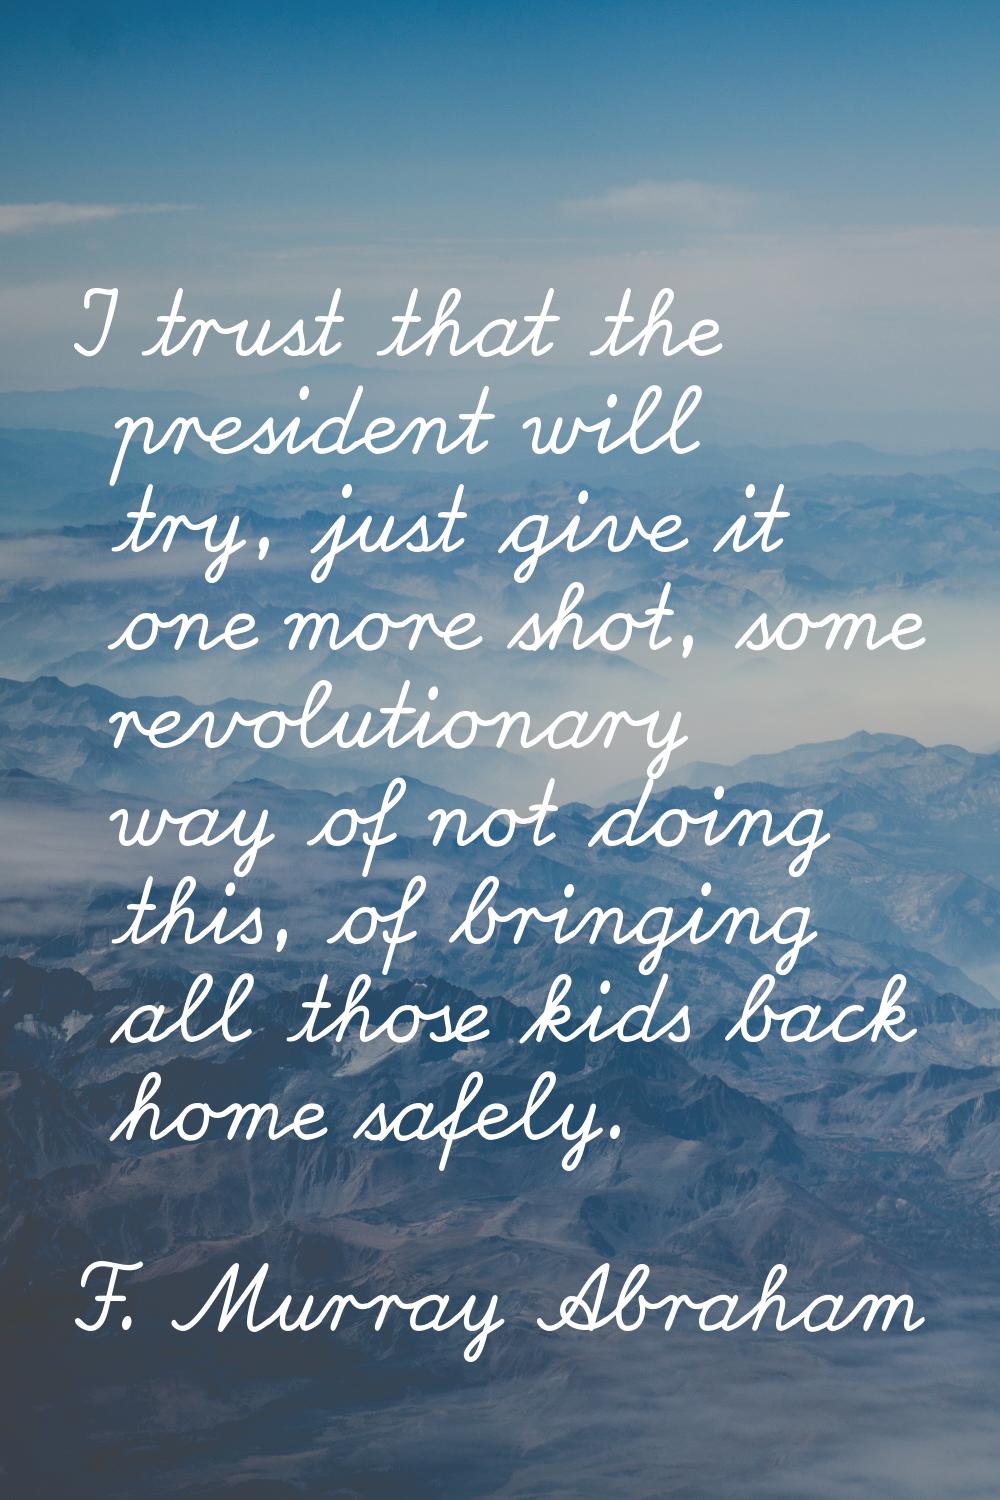 I trust that the president will try, just give it one more shot, some revolutionary way of not doin